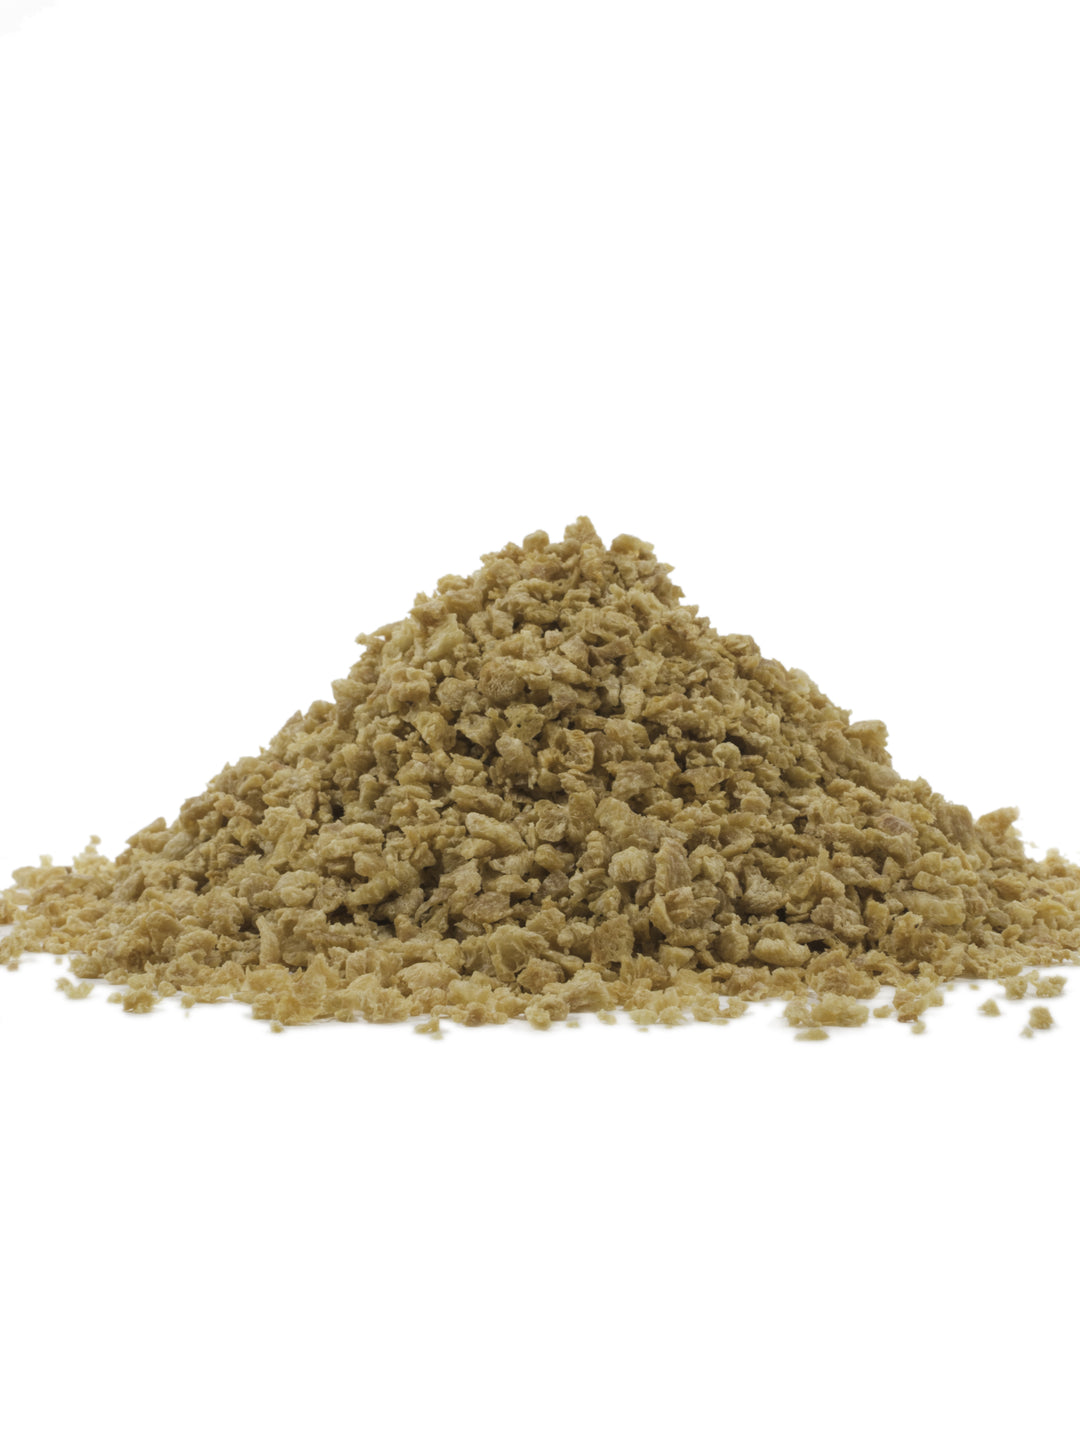 Bob's Red Mill Natural Foods Inc Textured Vegetable Protein-25 lb.